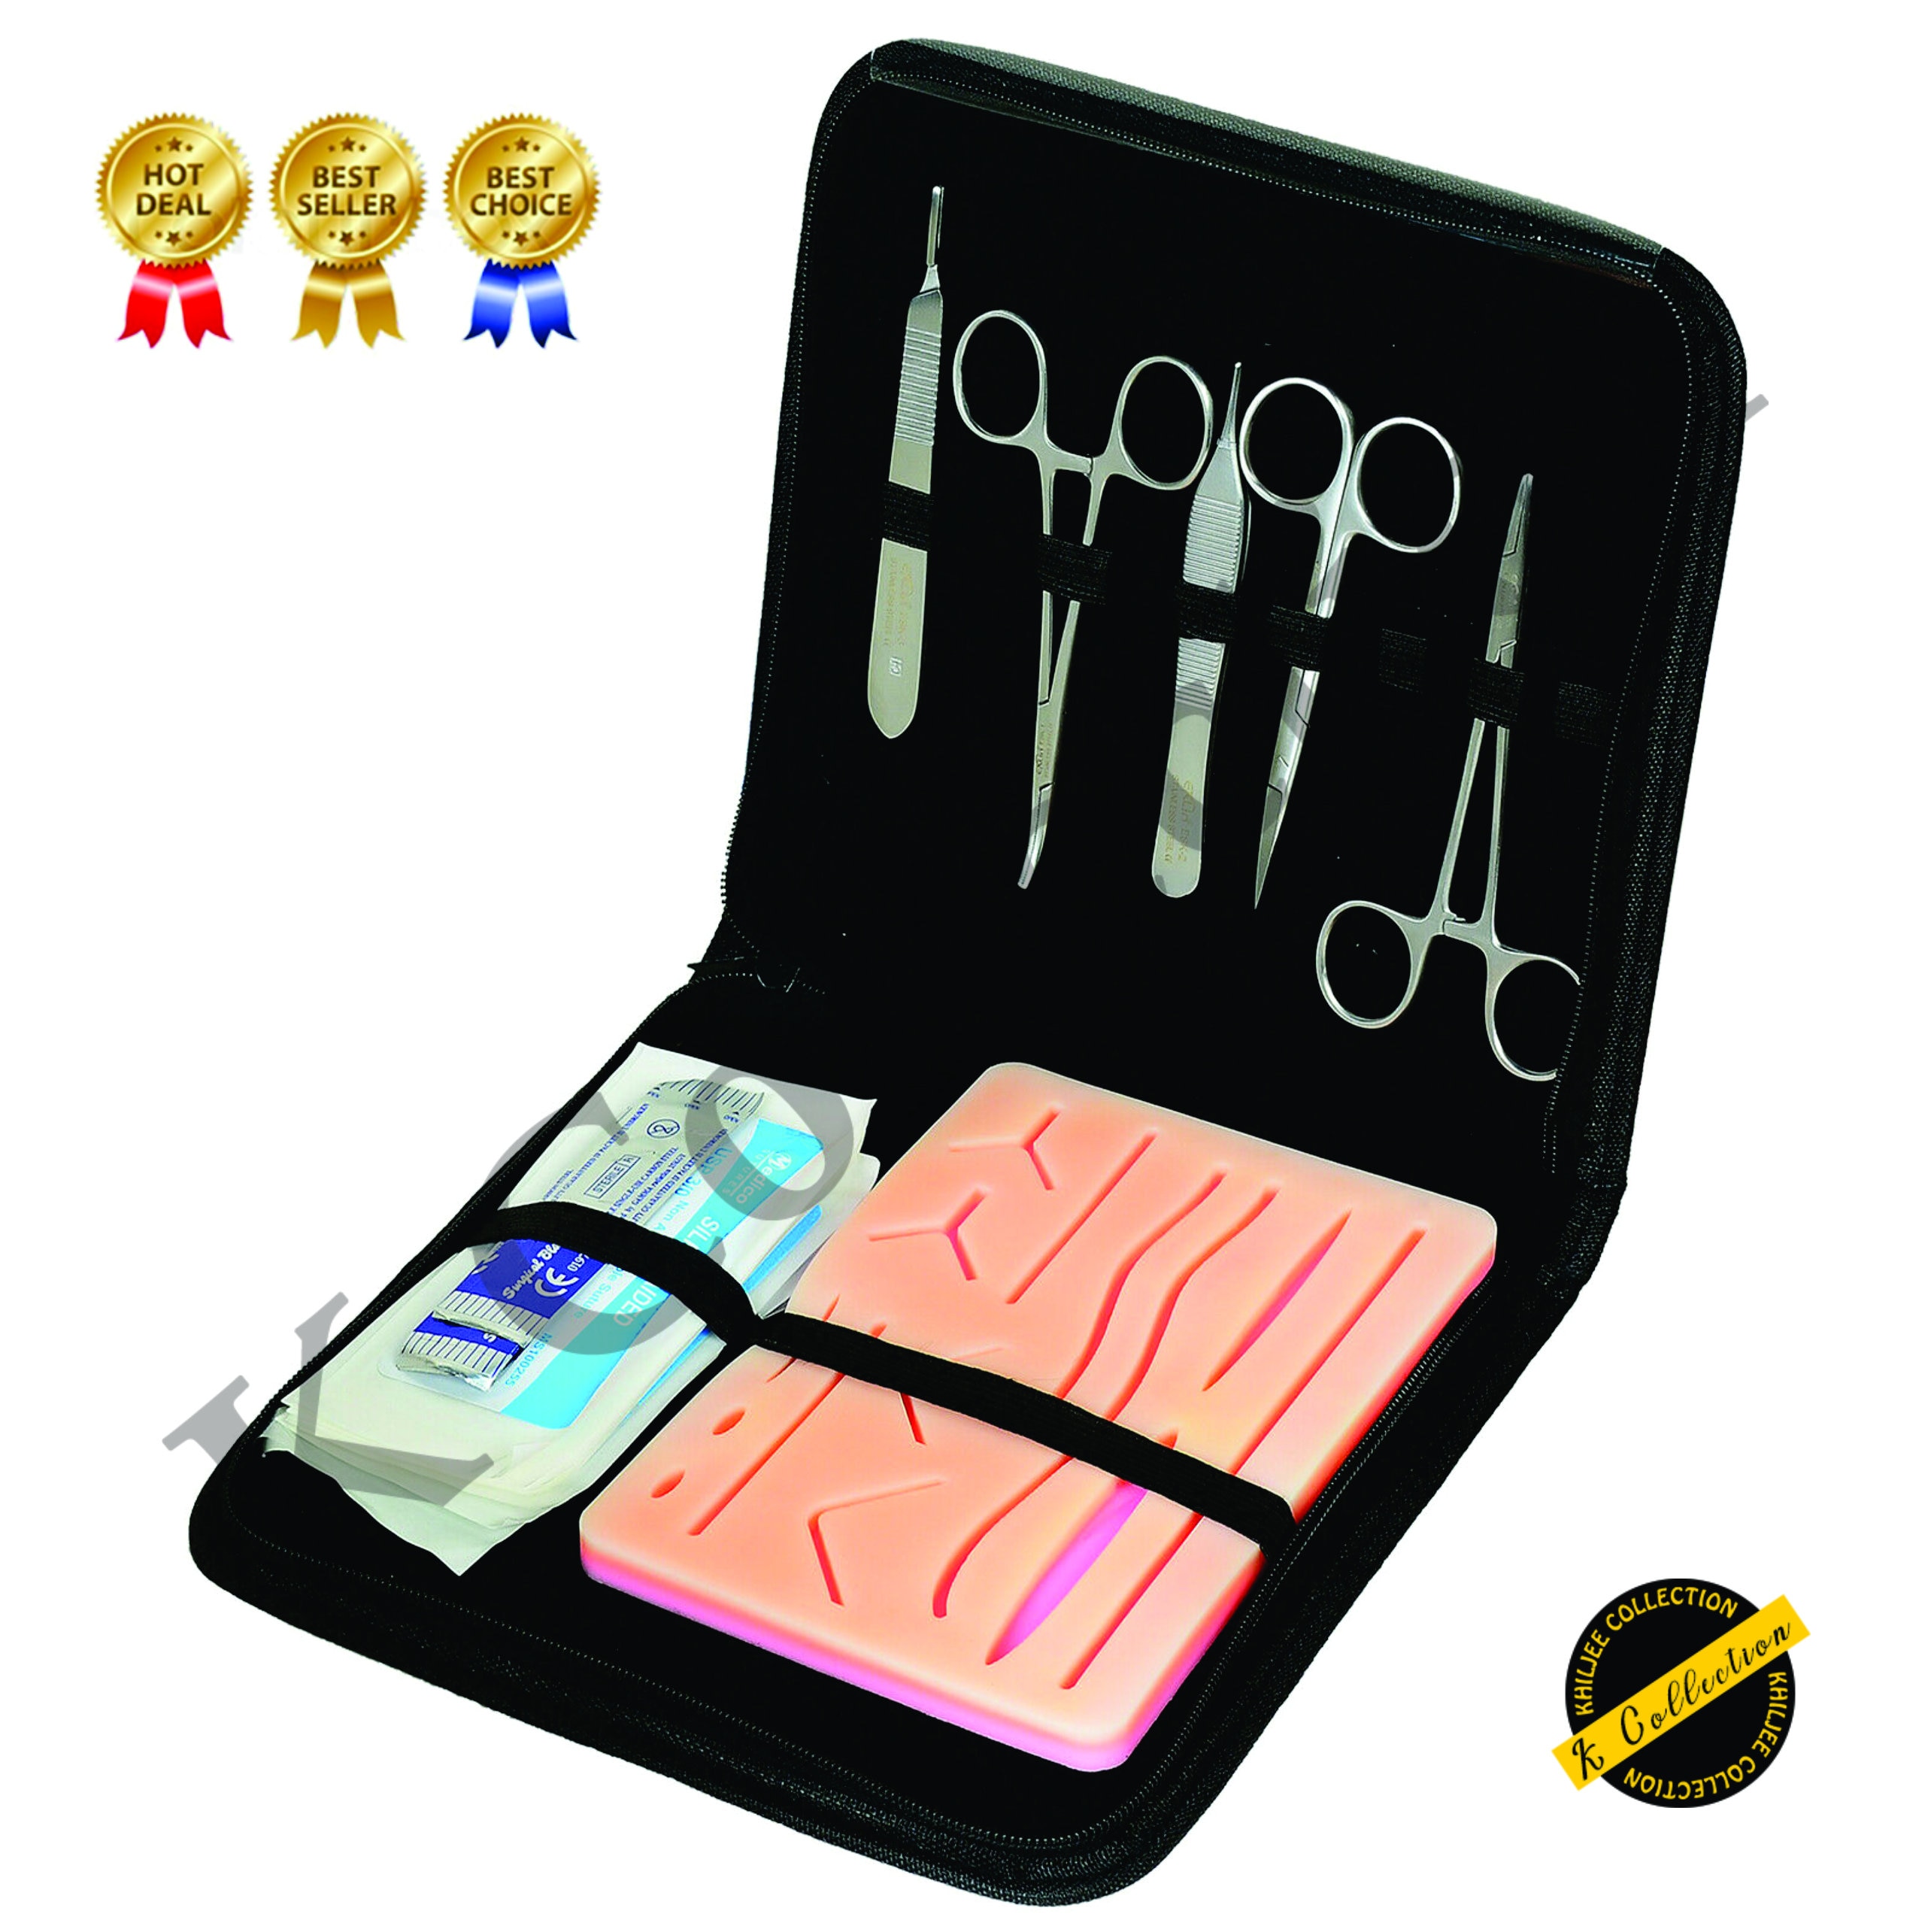 Suture Practice Kit for Medical Student, Complete Suture Practice Kit,  Suture Training Include Upgrade Suture Pad with 3 Layers and 14 Wounds with